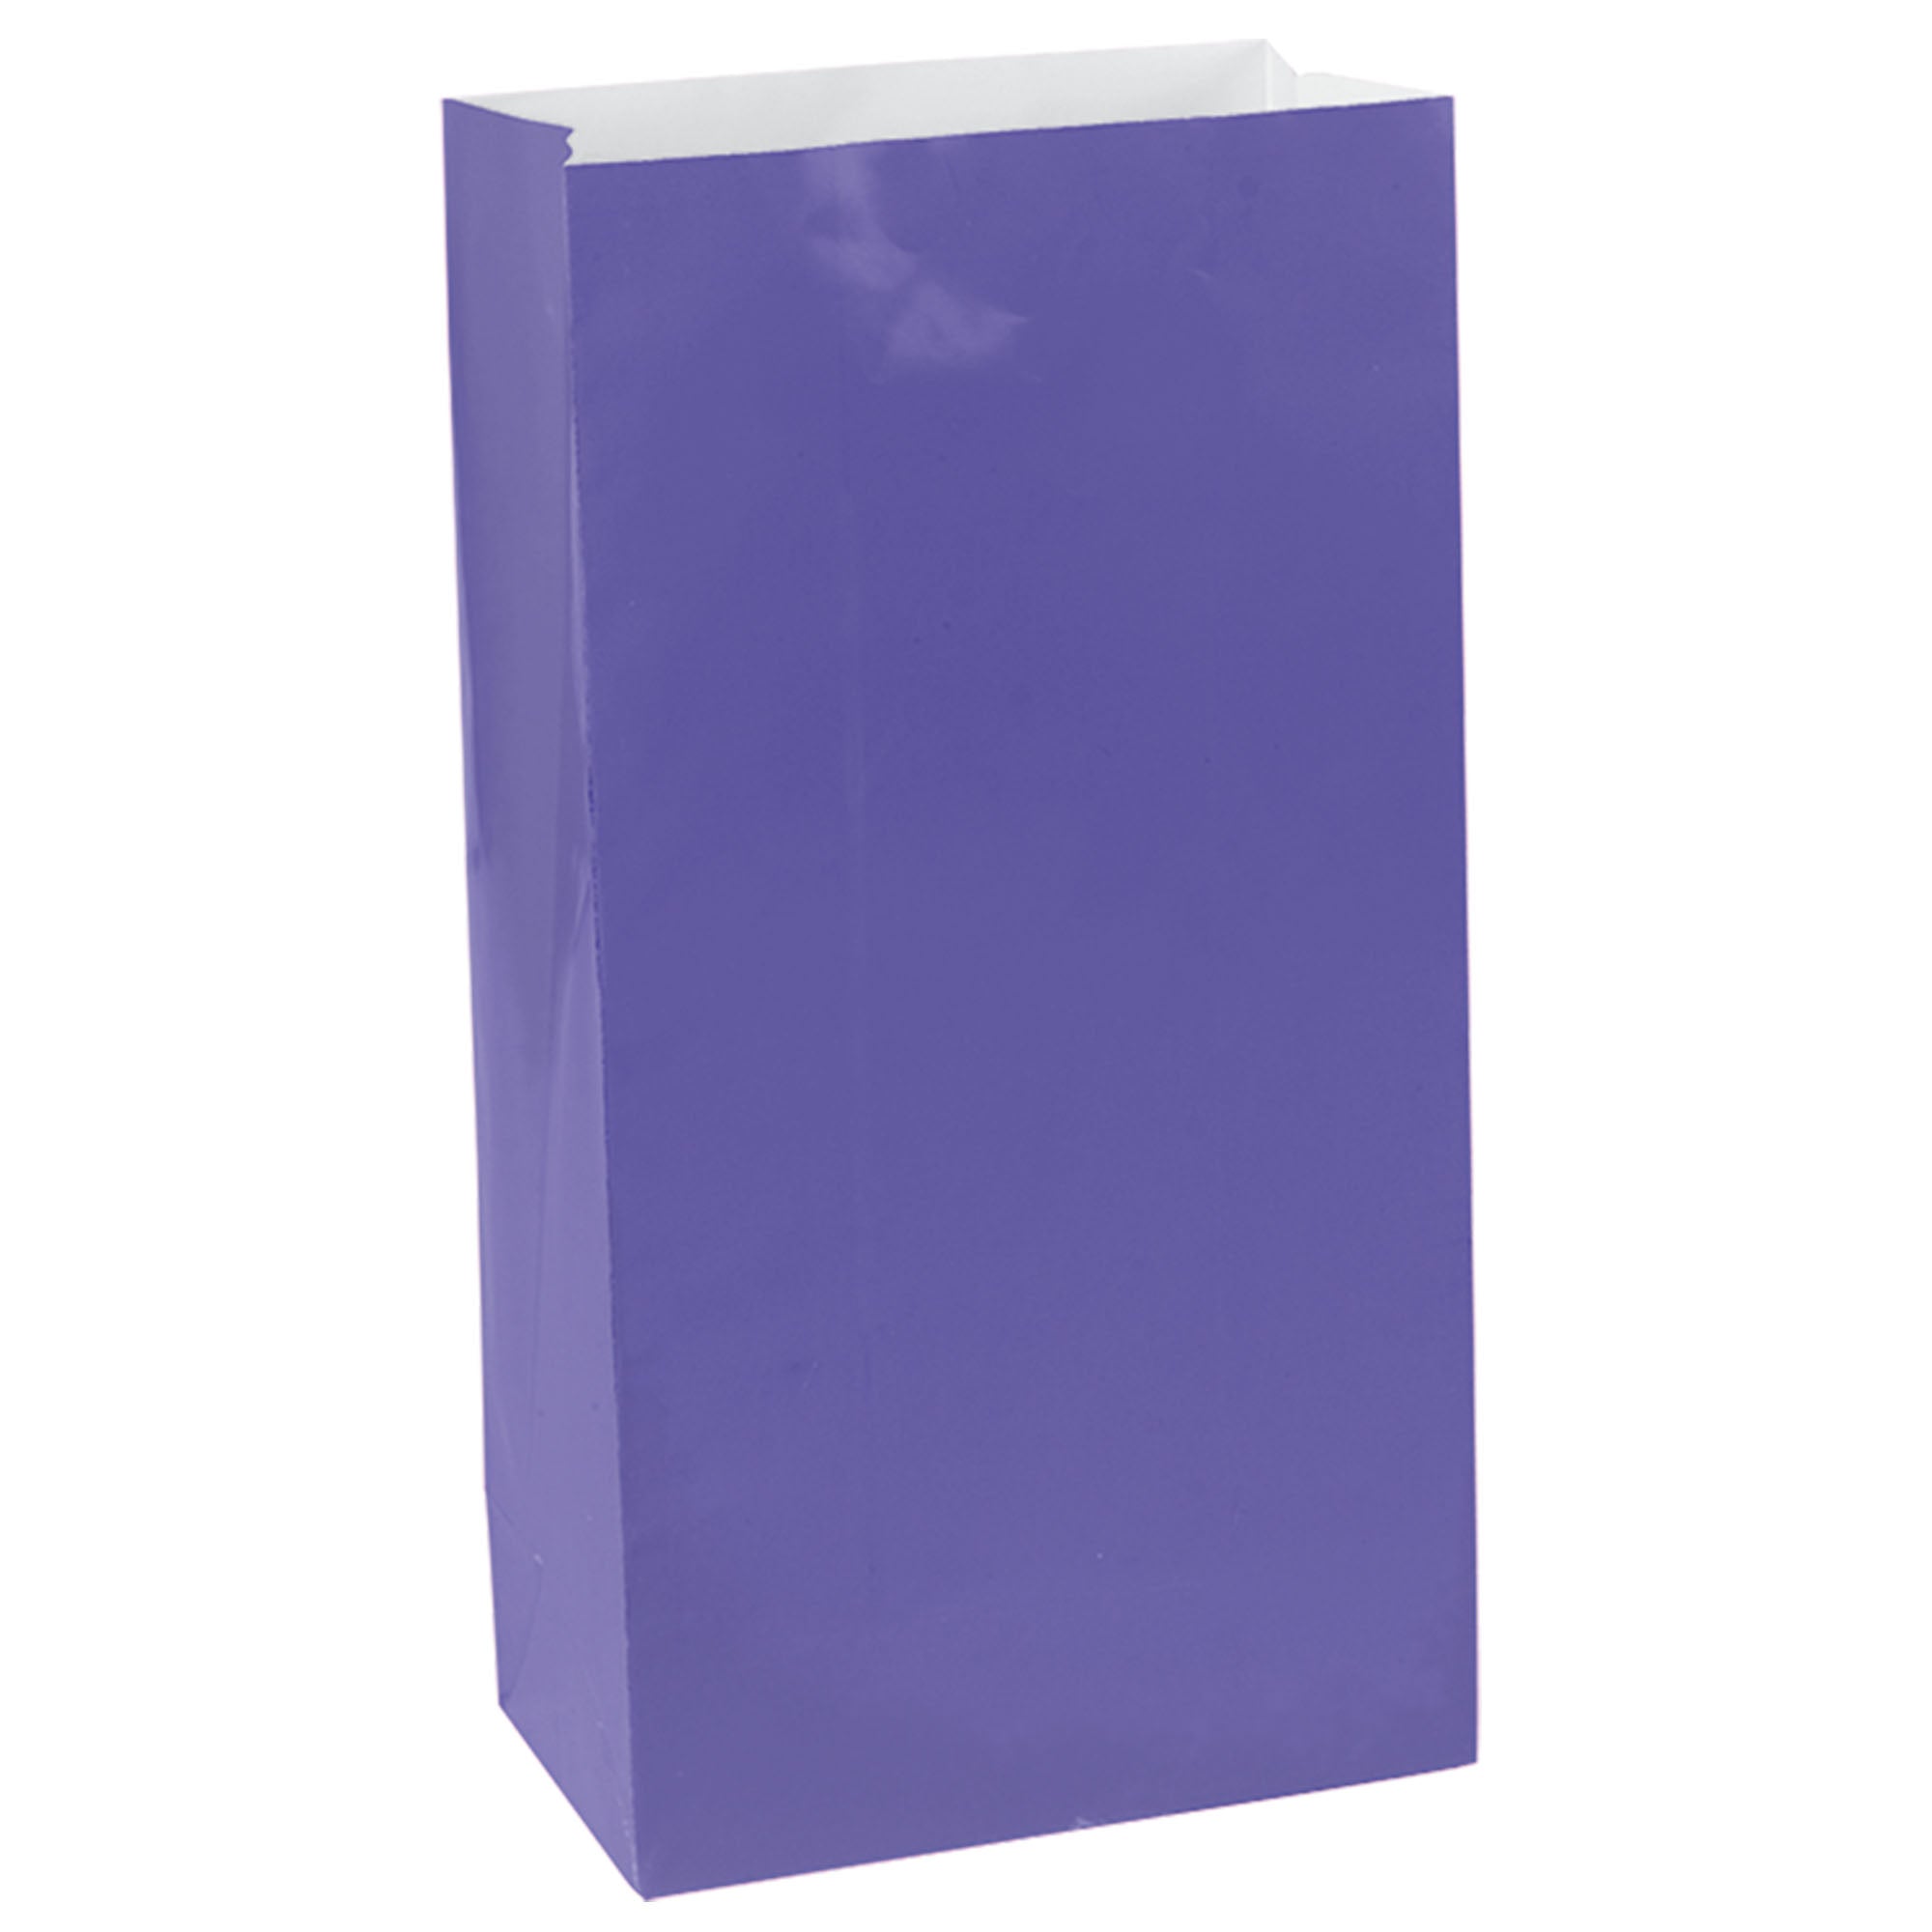 12 Mini Packaged Paper Bags  New Purple  6.5x3x2in